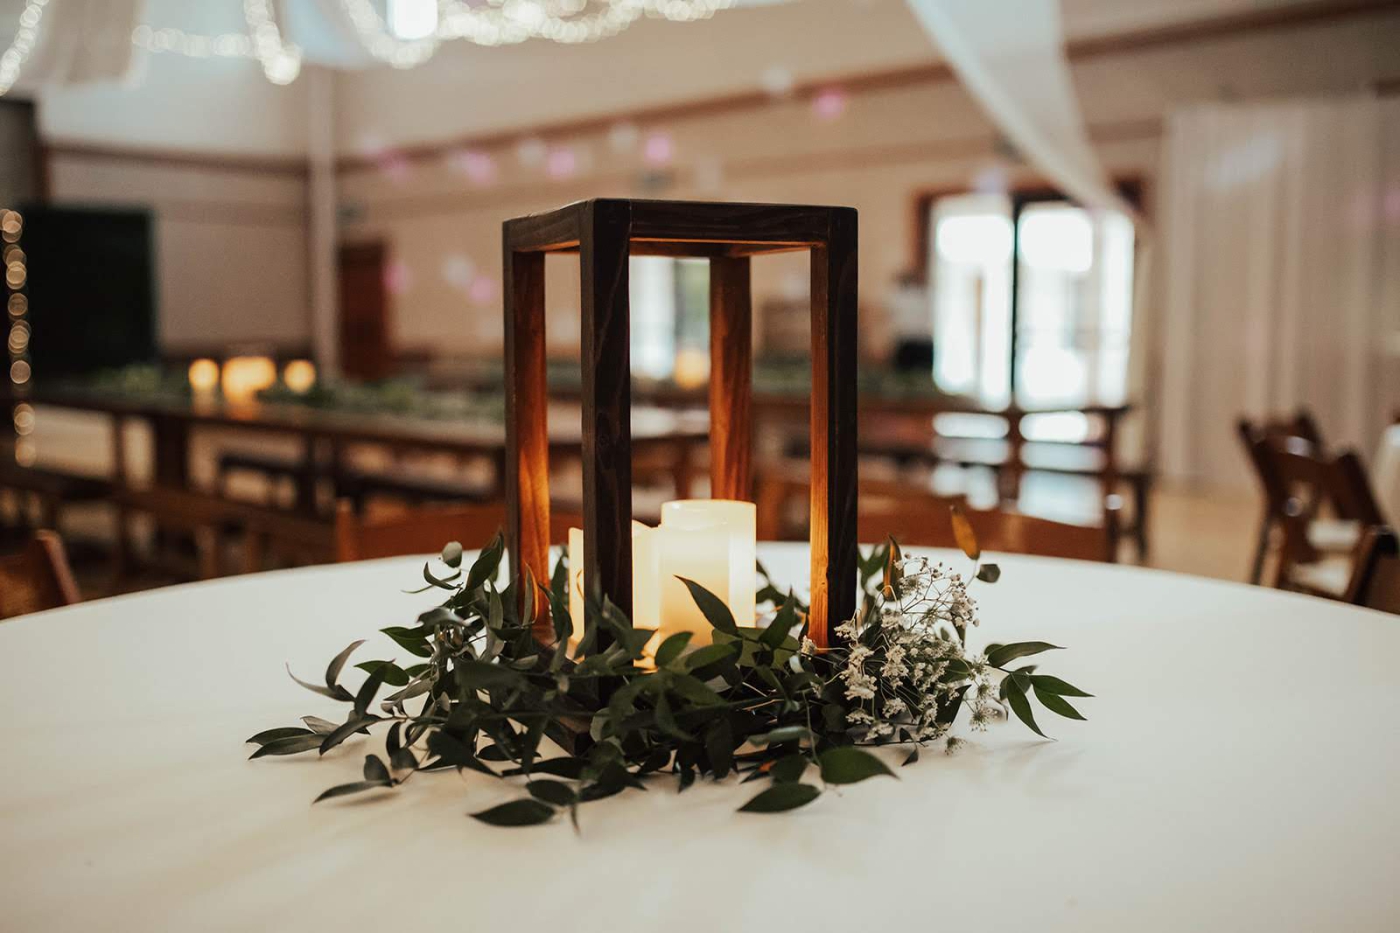 Rustic wedding table decorations